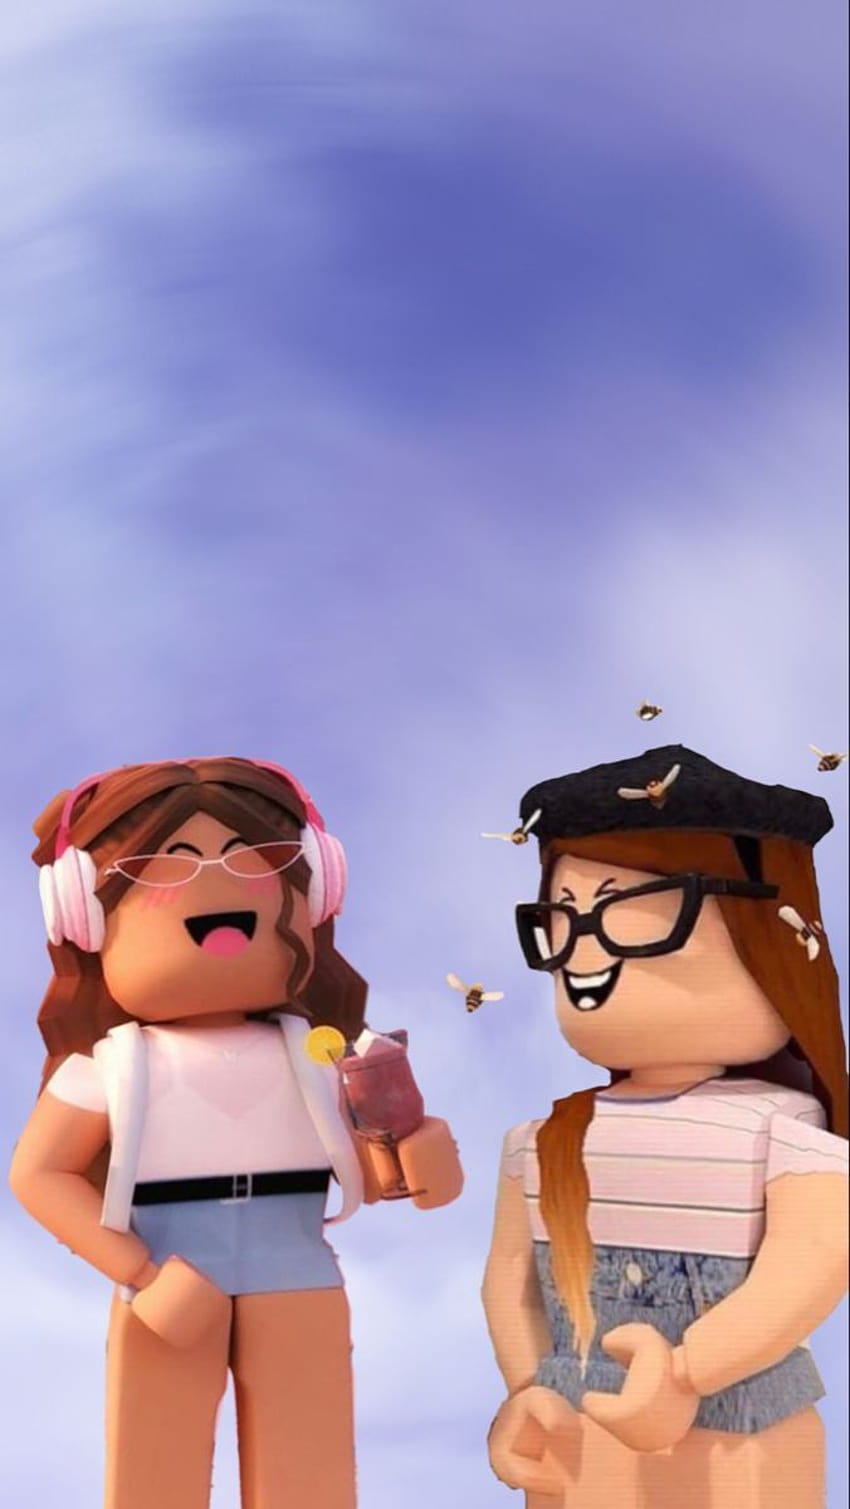 Roblox Friends posted by Zoey Johnson, roblox girls bff HD phone wallpaper